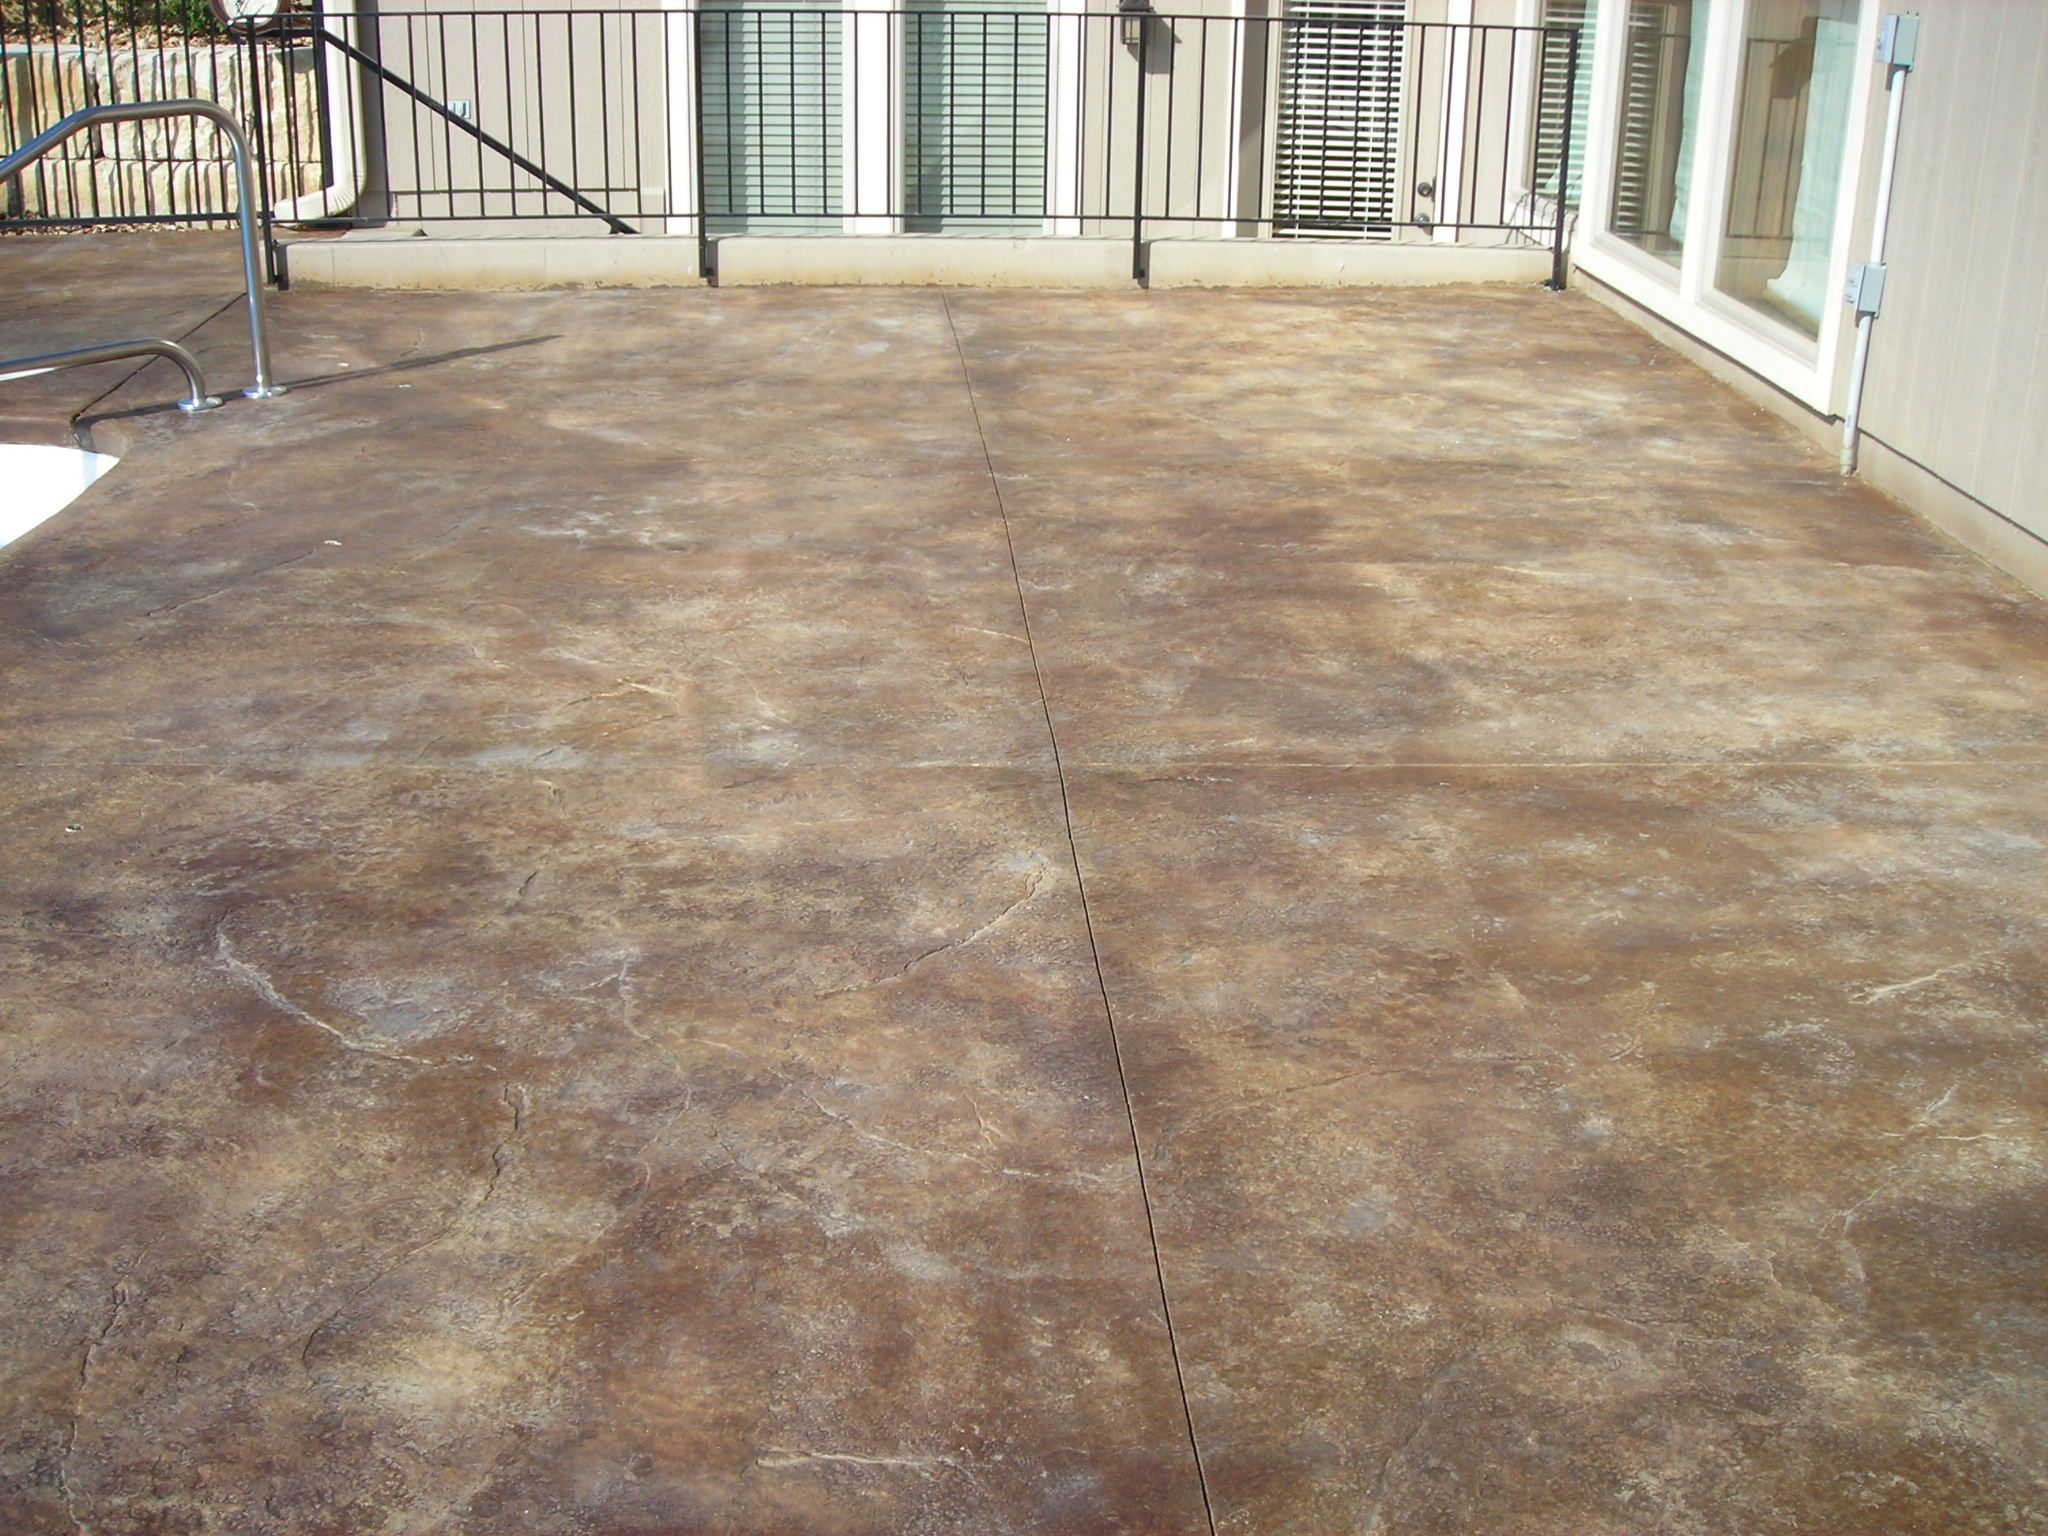 10 best CONCRETE STAIN images on Pinterest | Cement, Acid stain ...